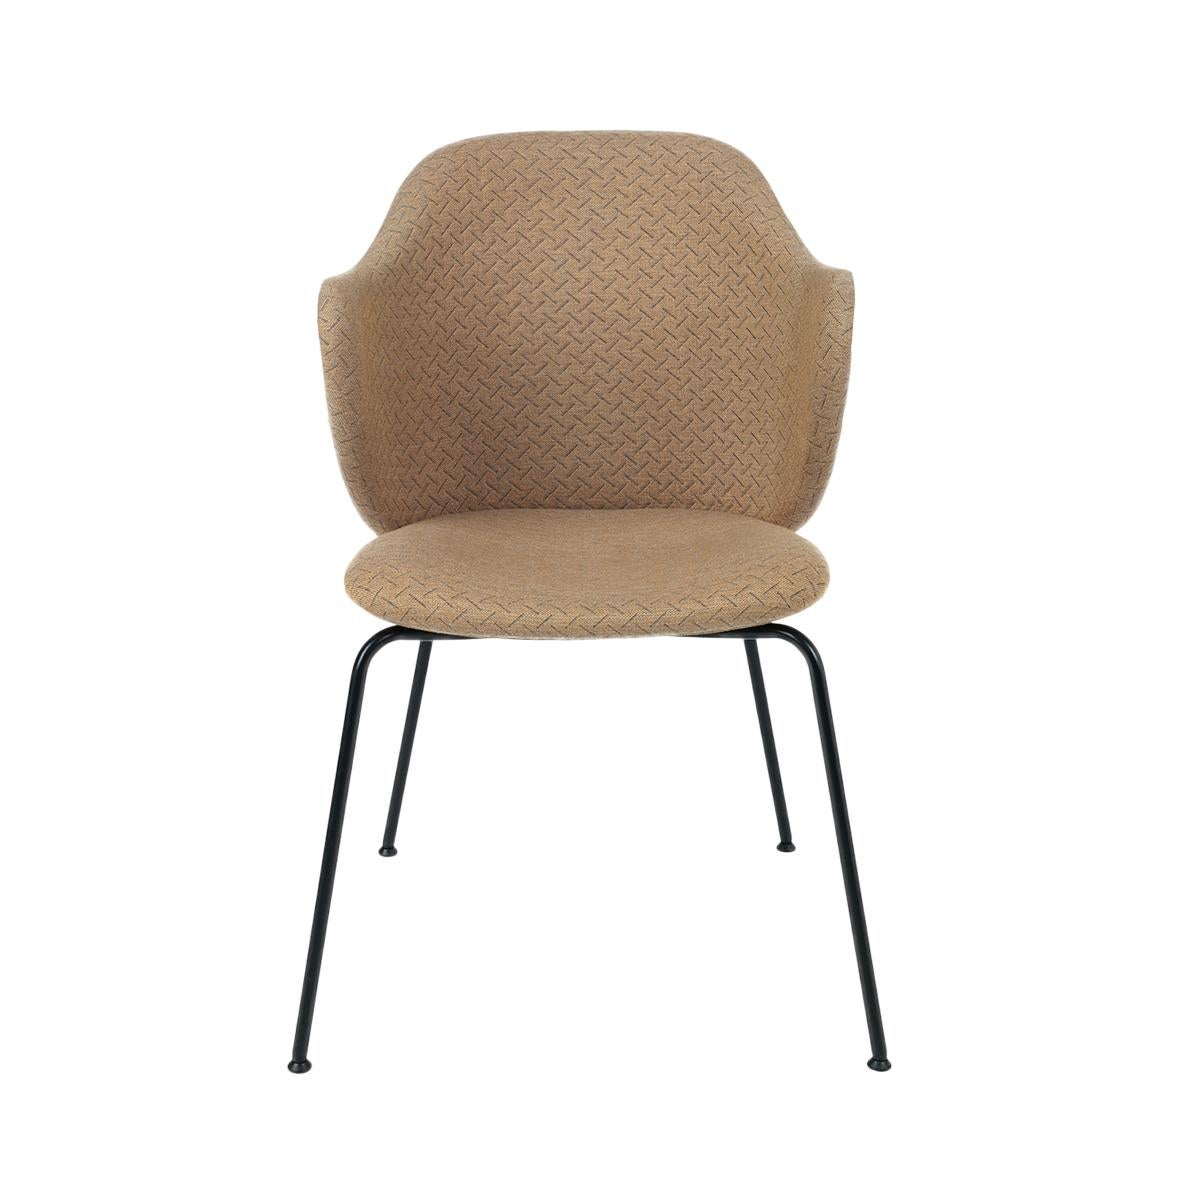 Brown Jupiter Lassen chair by Lassen
Dimensions: W 58 x D 60 x H 88 cm 
Materials: Textile

The Lassen Chair by Flemming Lassen, Magnus Sangild and Marianne Viktor was launched in 2018 as an ode to Flemming Lassen’s uncompromising approach and